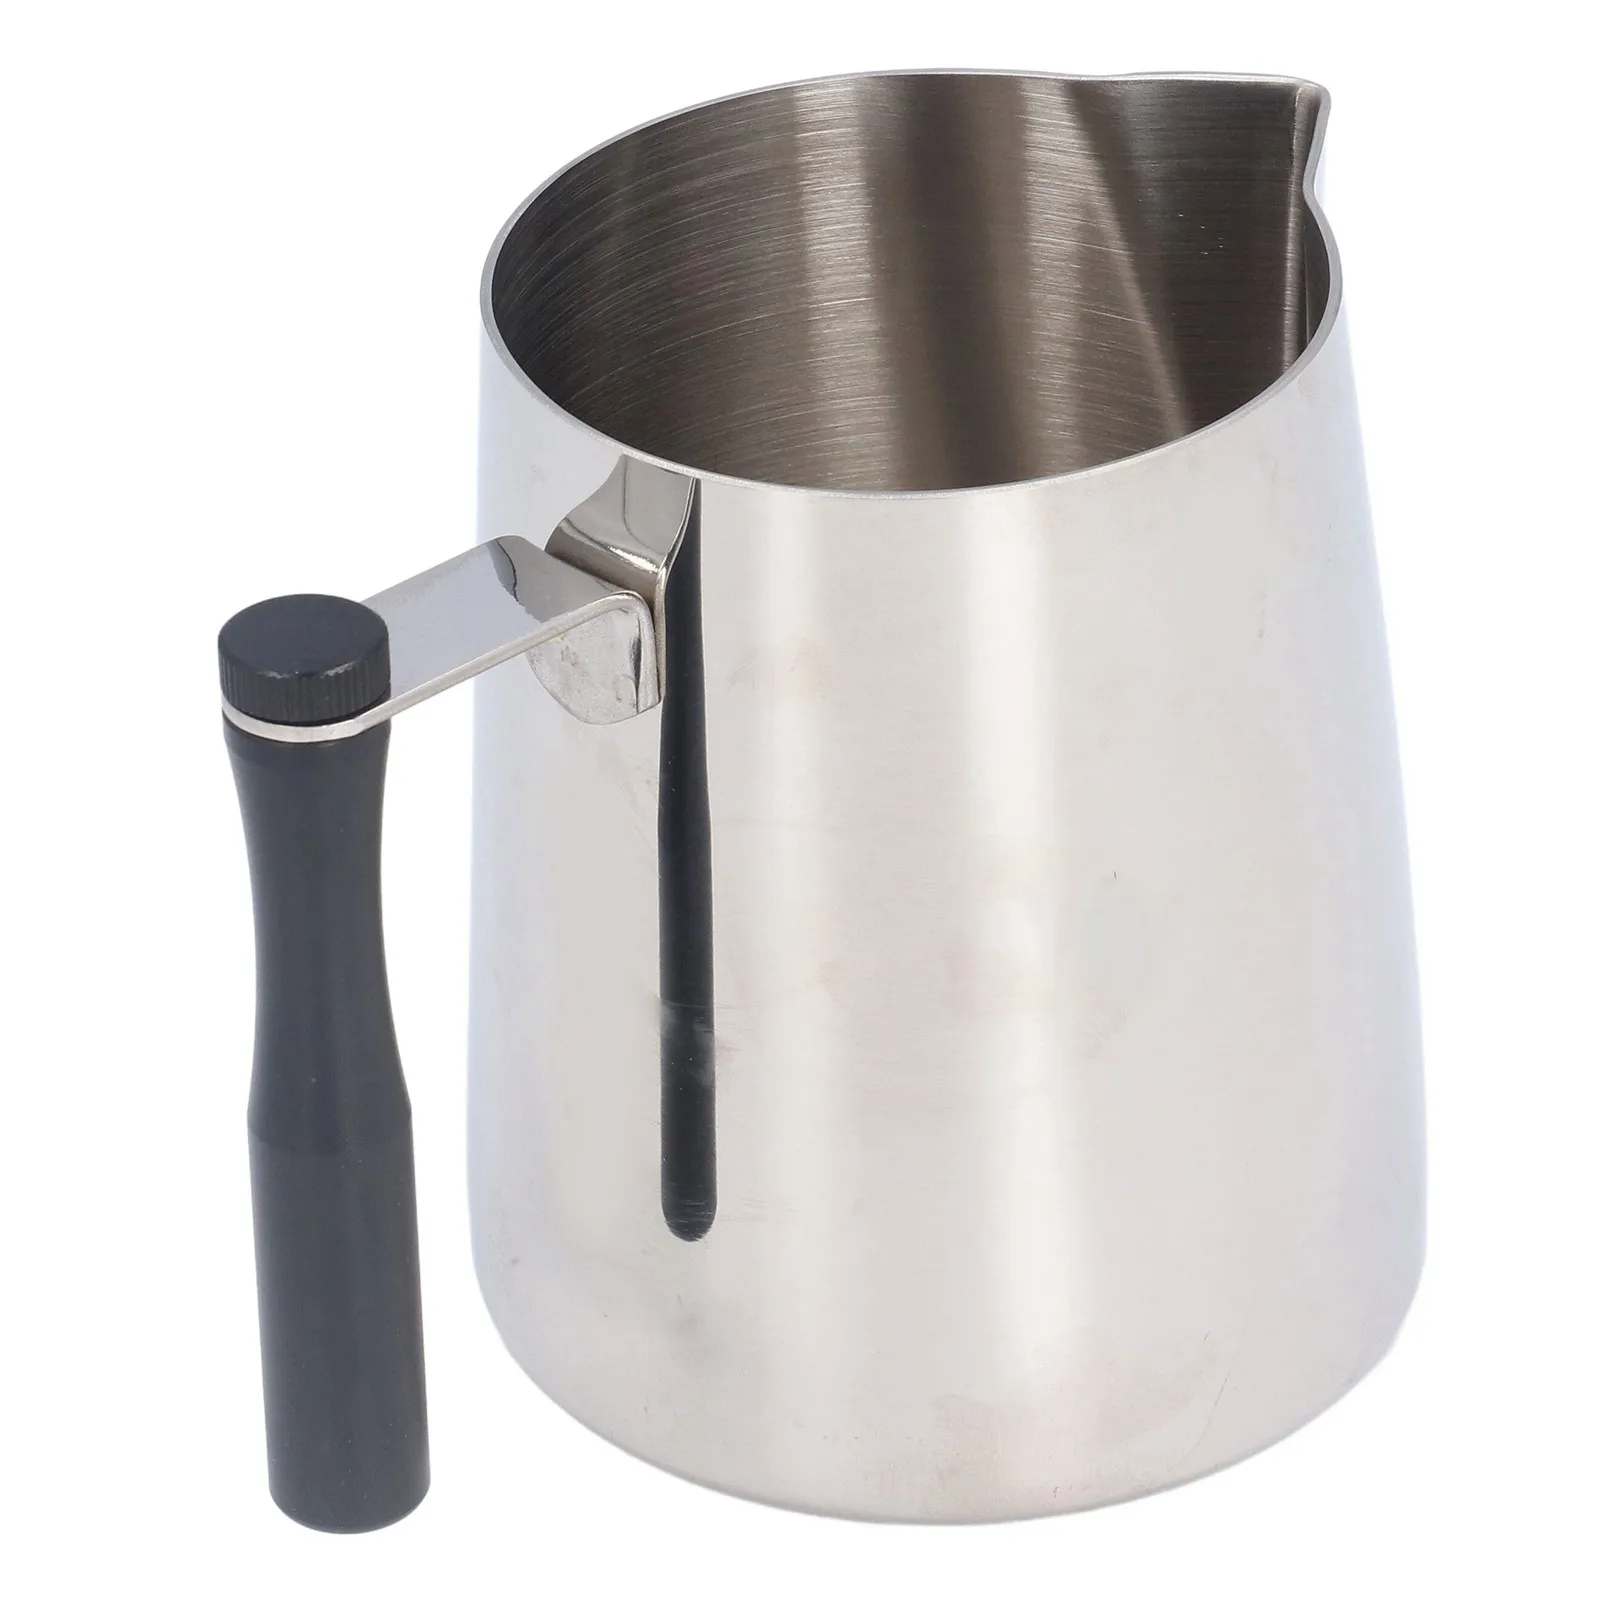 

600ML Stainless Steel Coffee Frothing Pitcher Break Resistance Milk Frothing Cup with Detachable HandleBlack